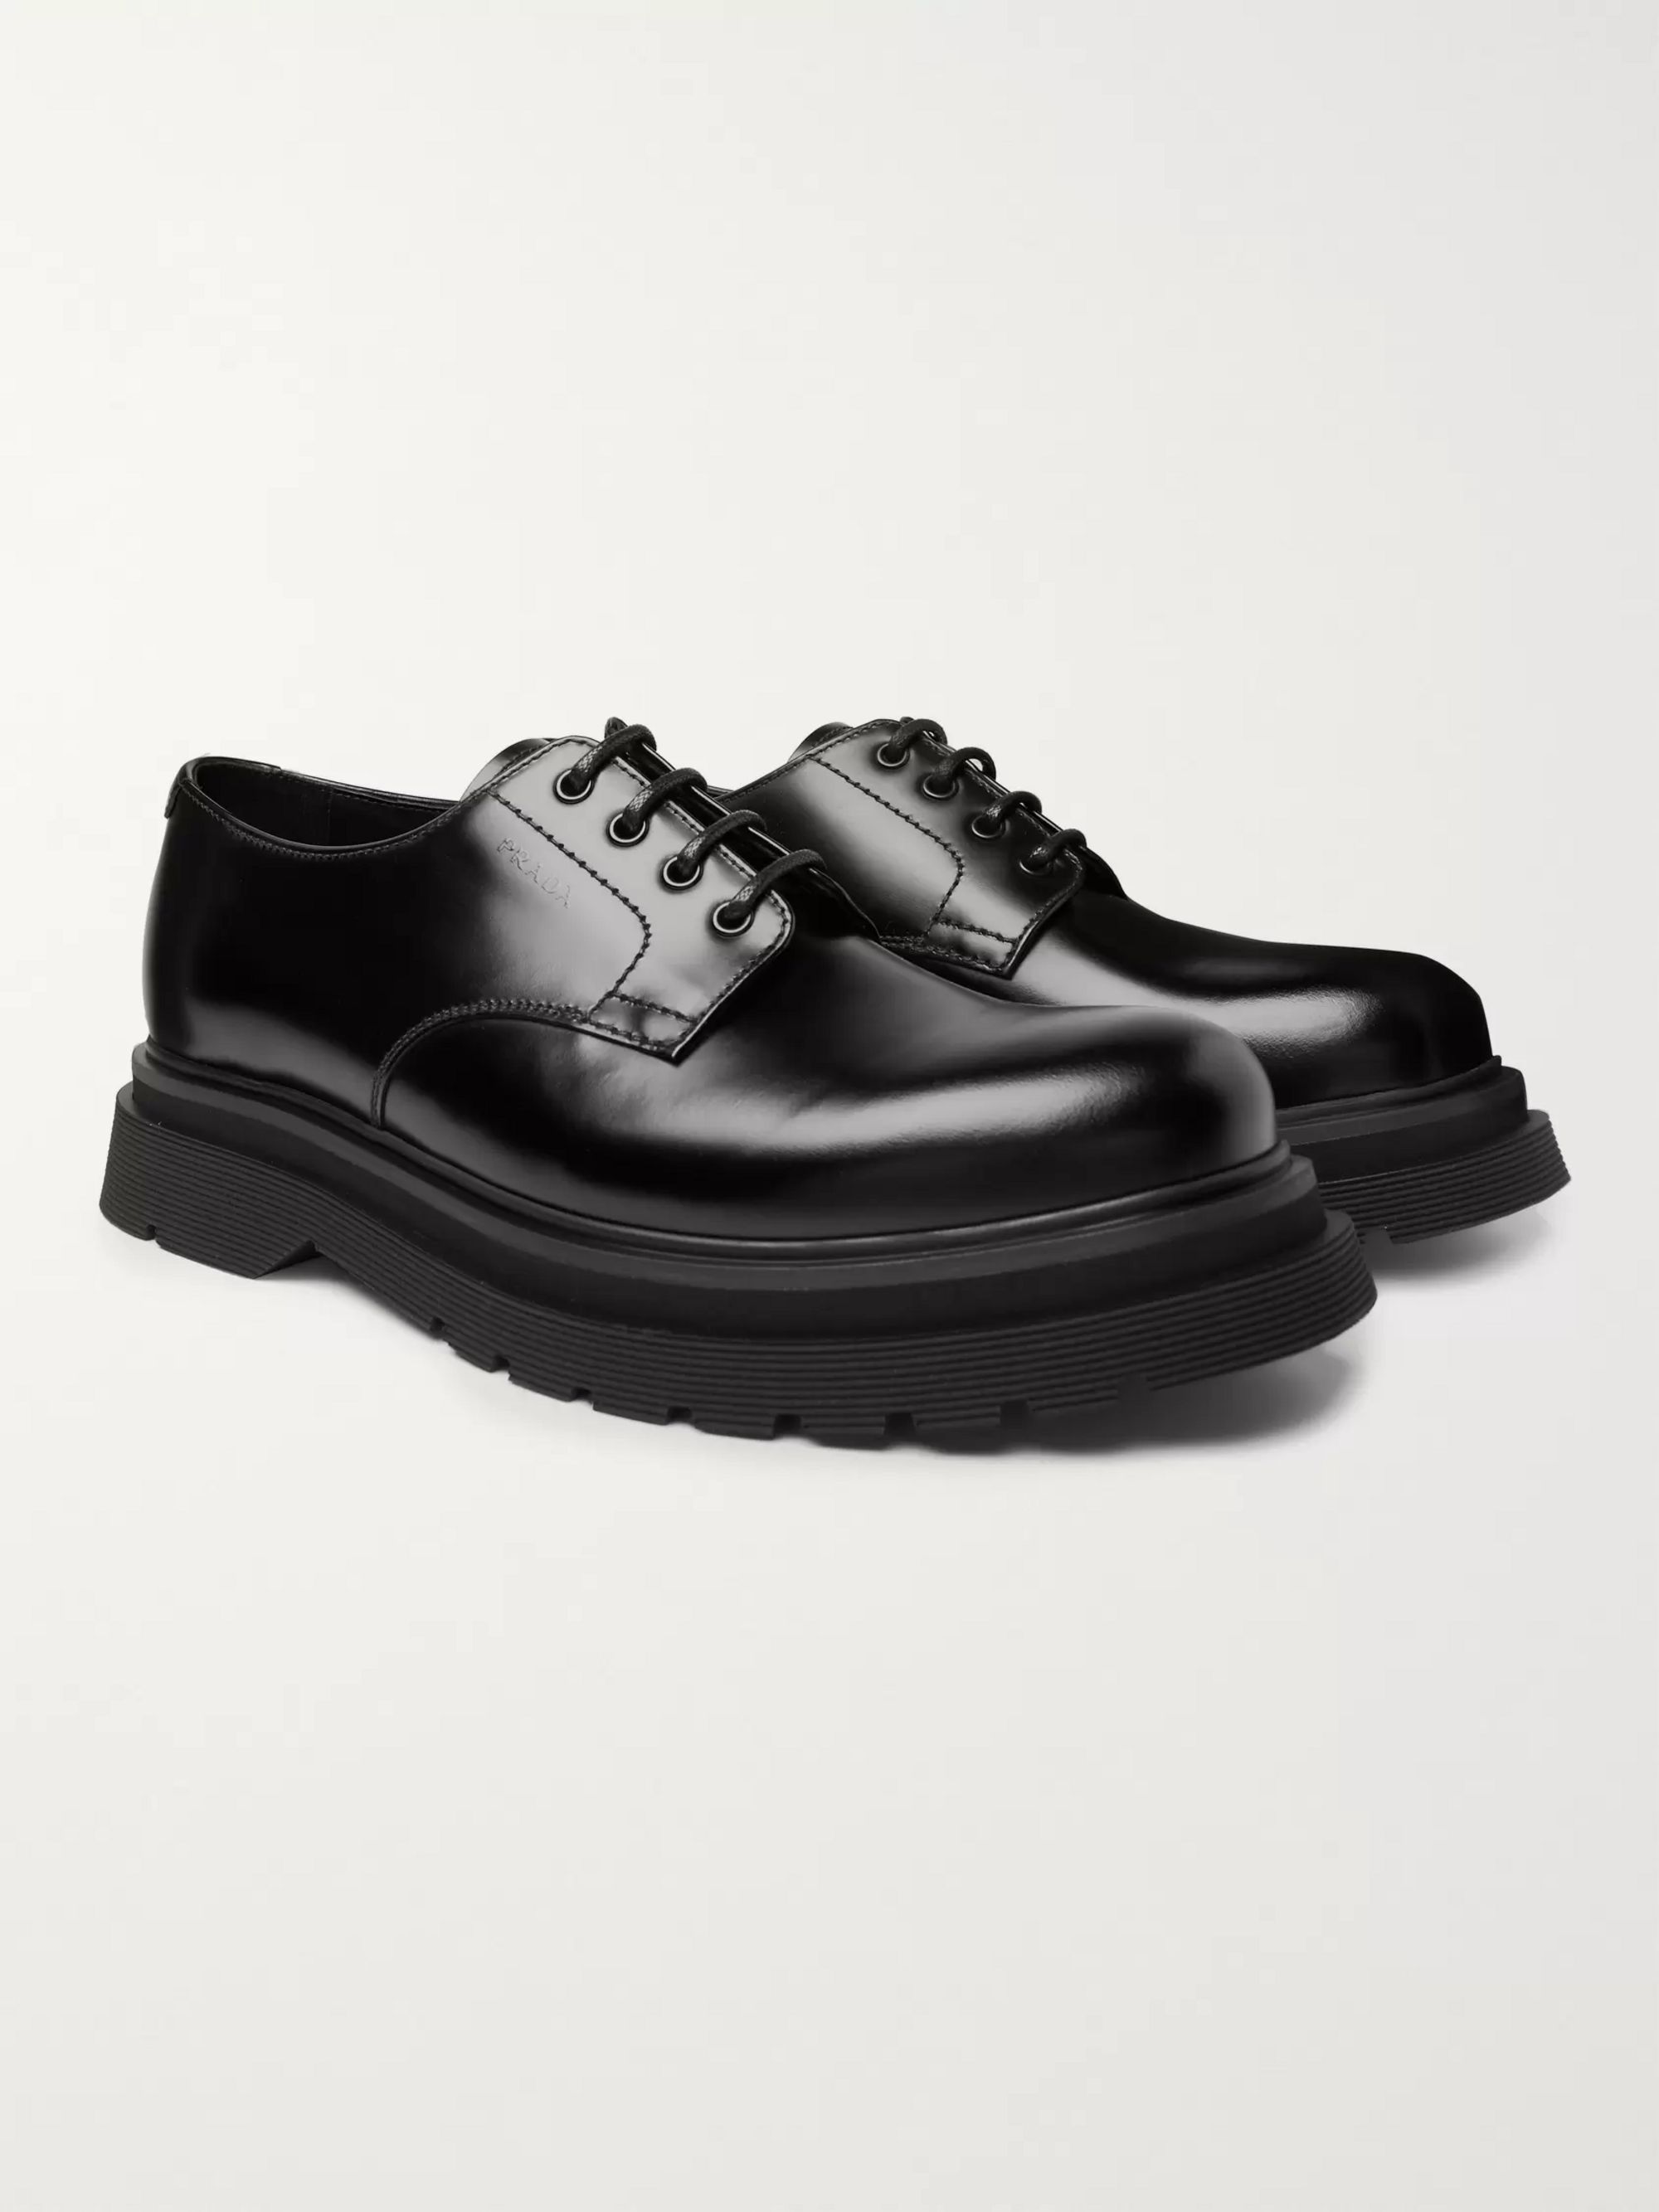 Black Spazzolato Leather Derby Shoes 